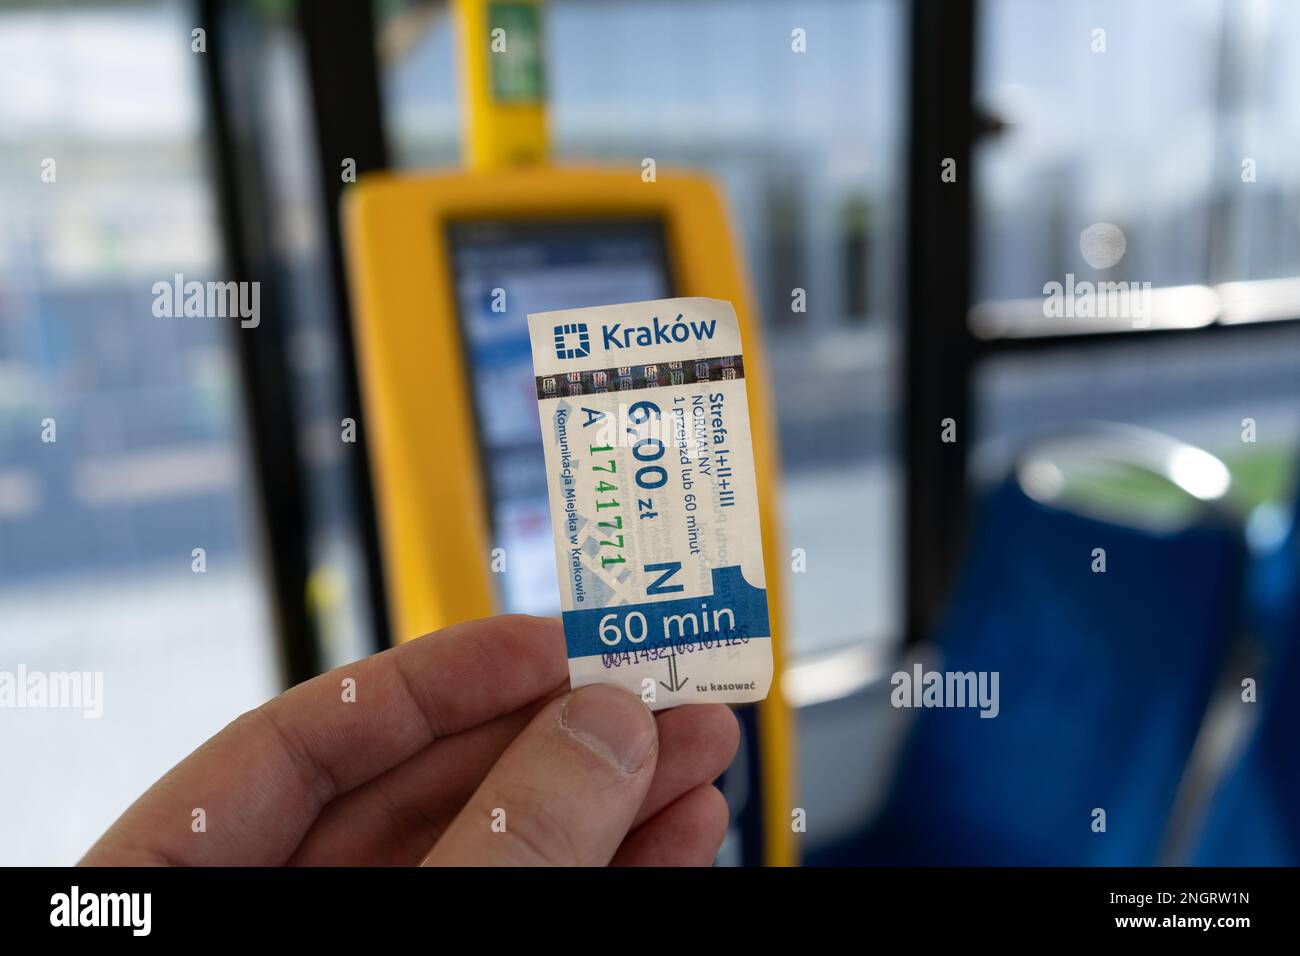 Hand holding a 60-minute full fare ticket type inside a MPK Kraków public transport bus, next to validation machine in Krakow, Poland. Stock Photo